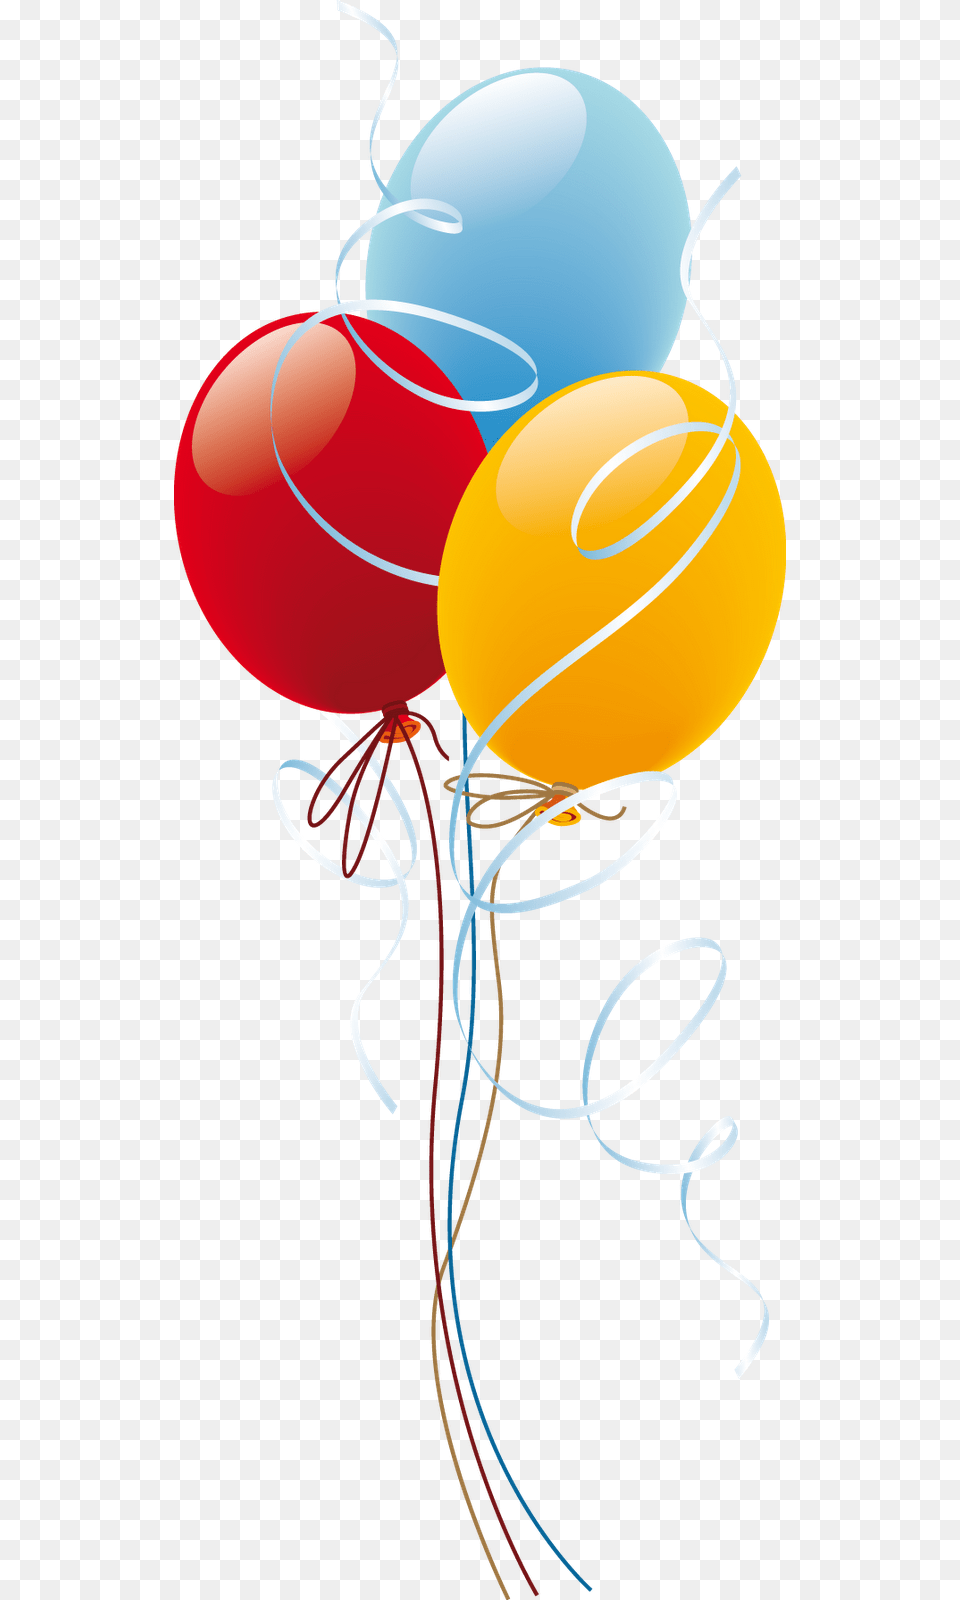 Aniversrio, Balloon Png